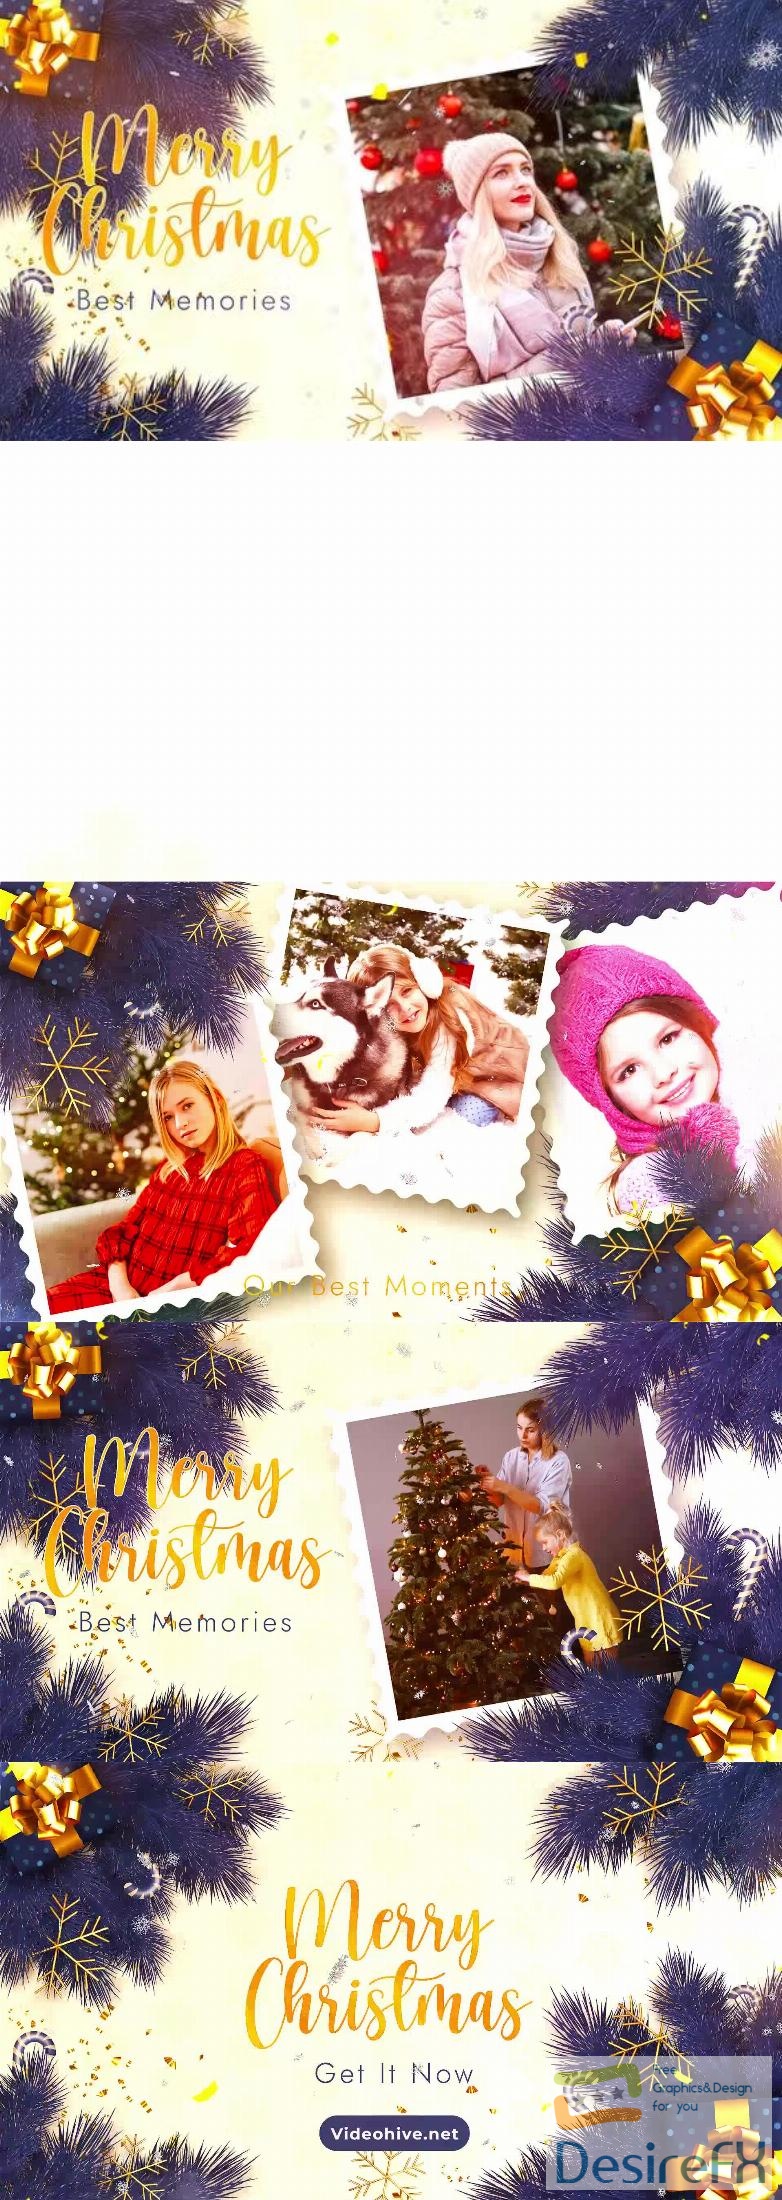 Videohive New Year Our Best Moments 35194728